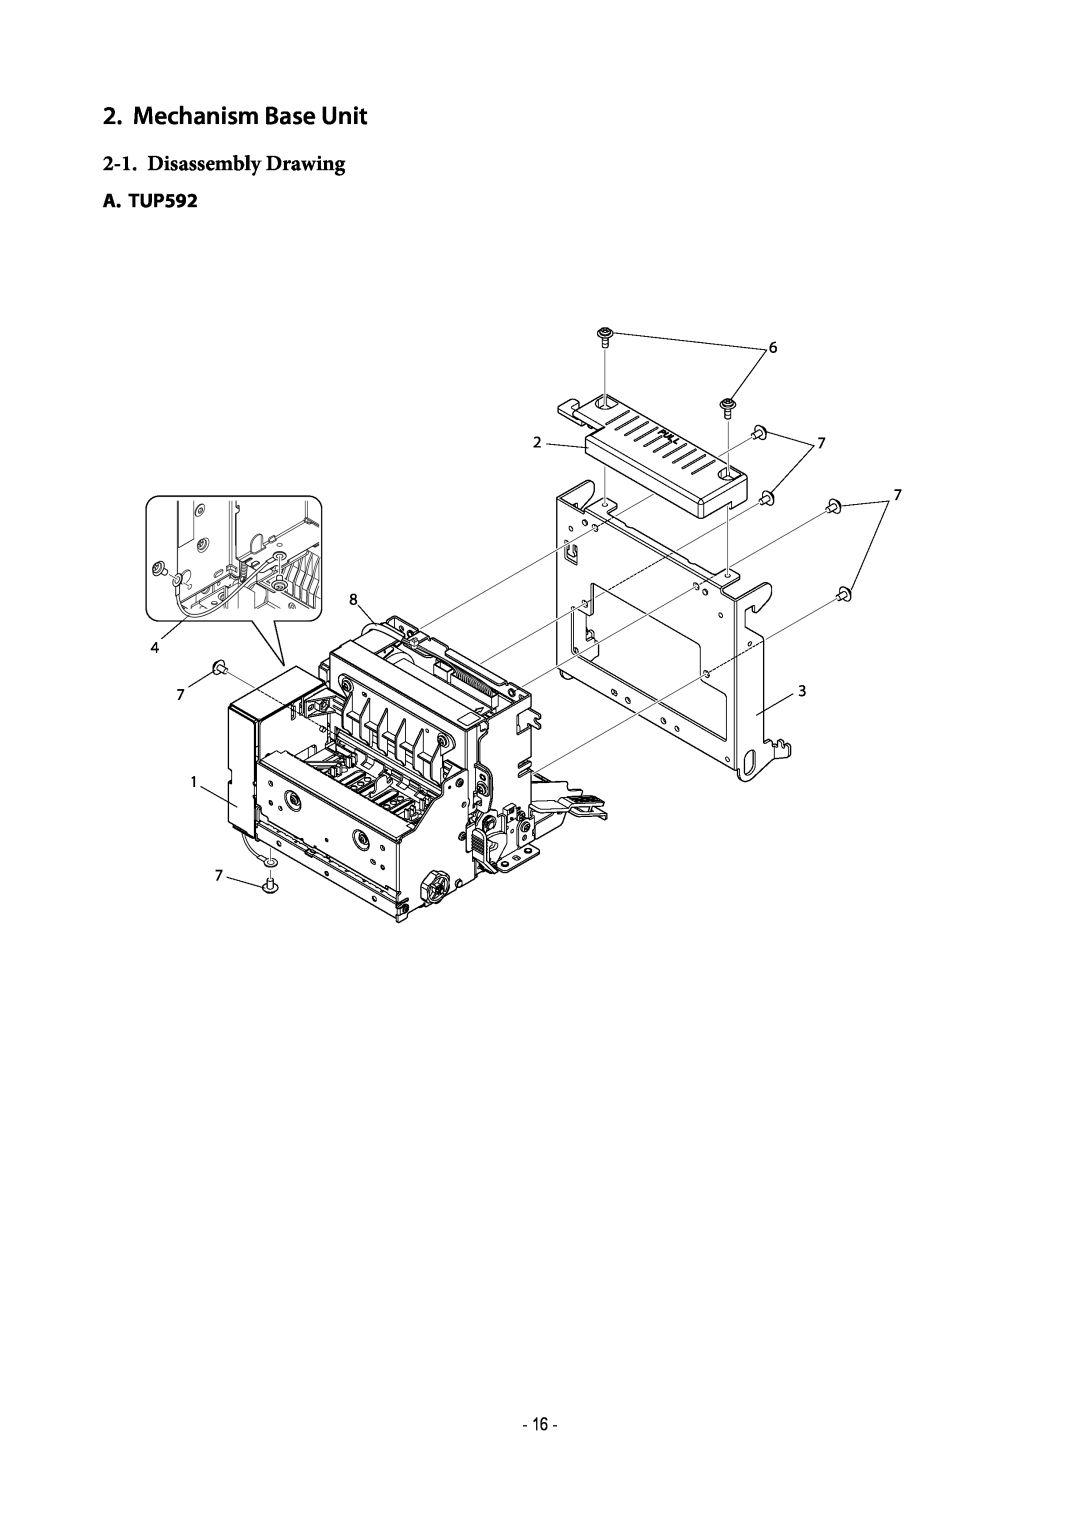 Star Micronics TUP500 technical manual Mechanism Base Unit, Disassembly Drawing 